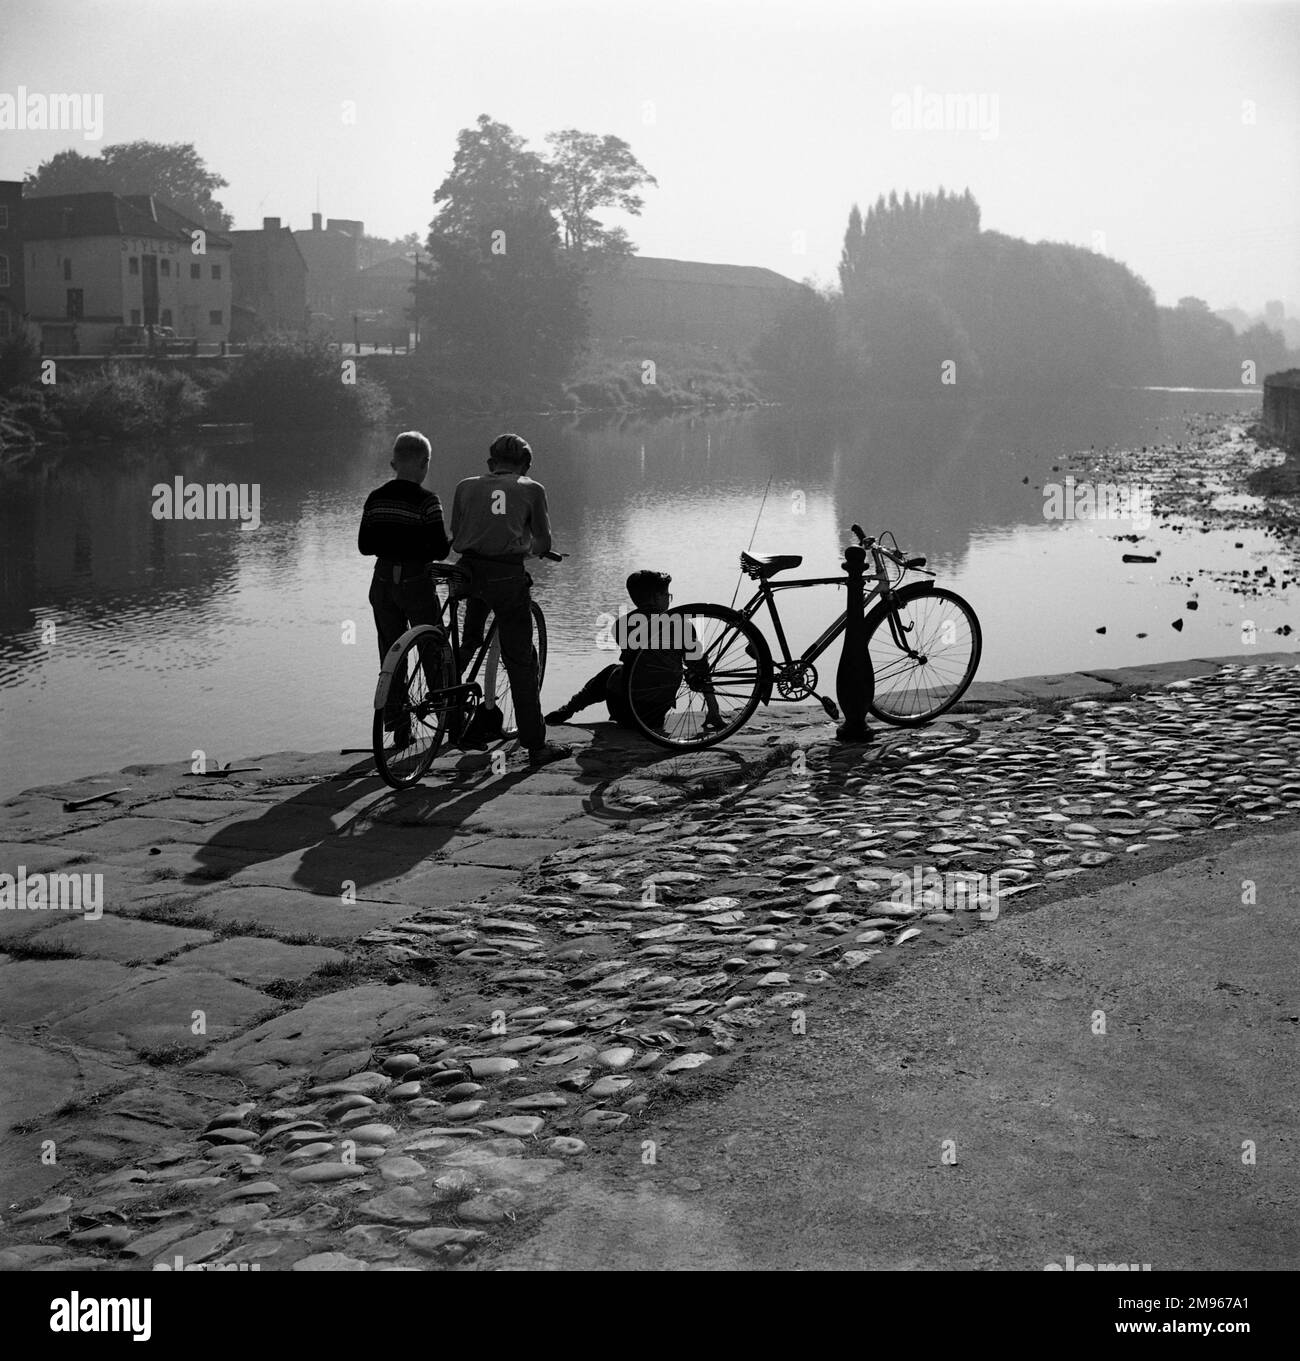 Three boys with their bikes admire the still river in the clear evening light at Bewdley Bridge, Worcestershire. Photograph by Norman Synge Waller Budd Stock Photo